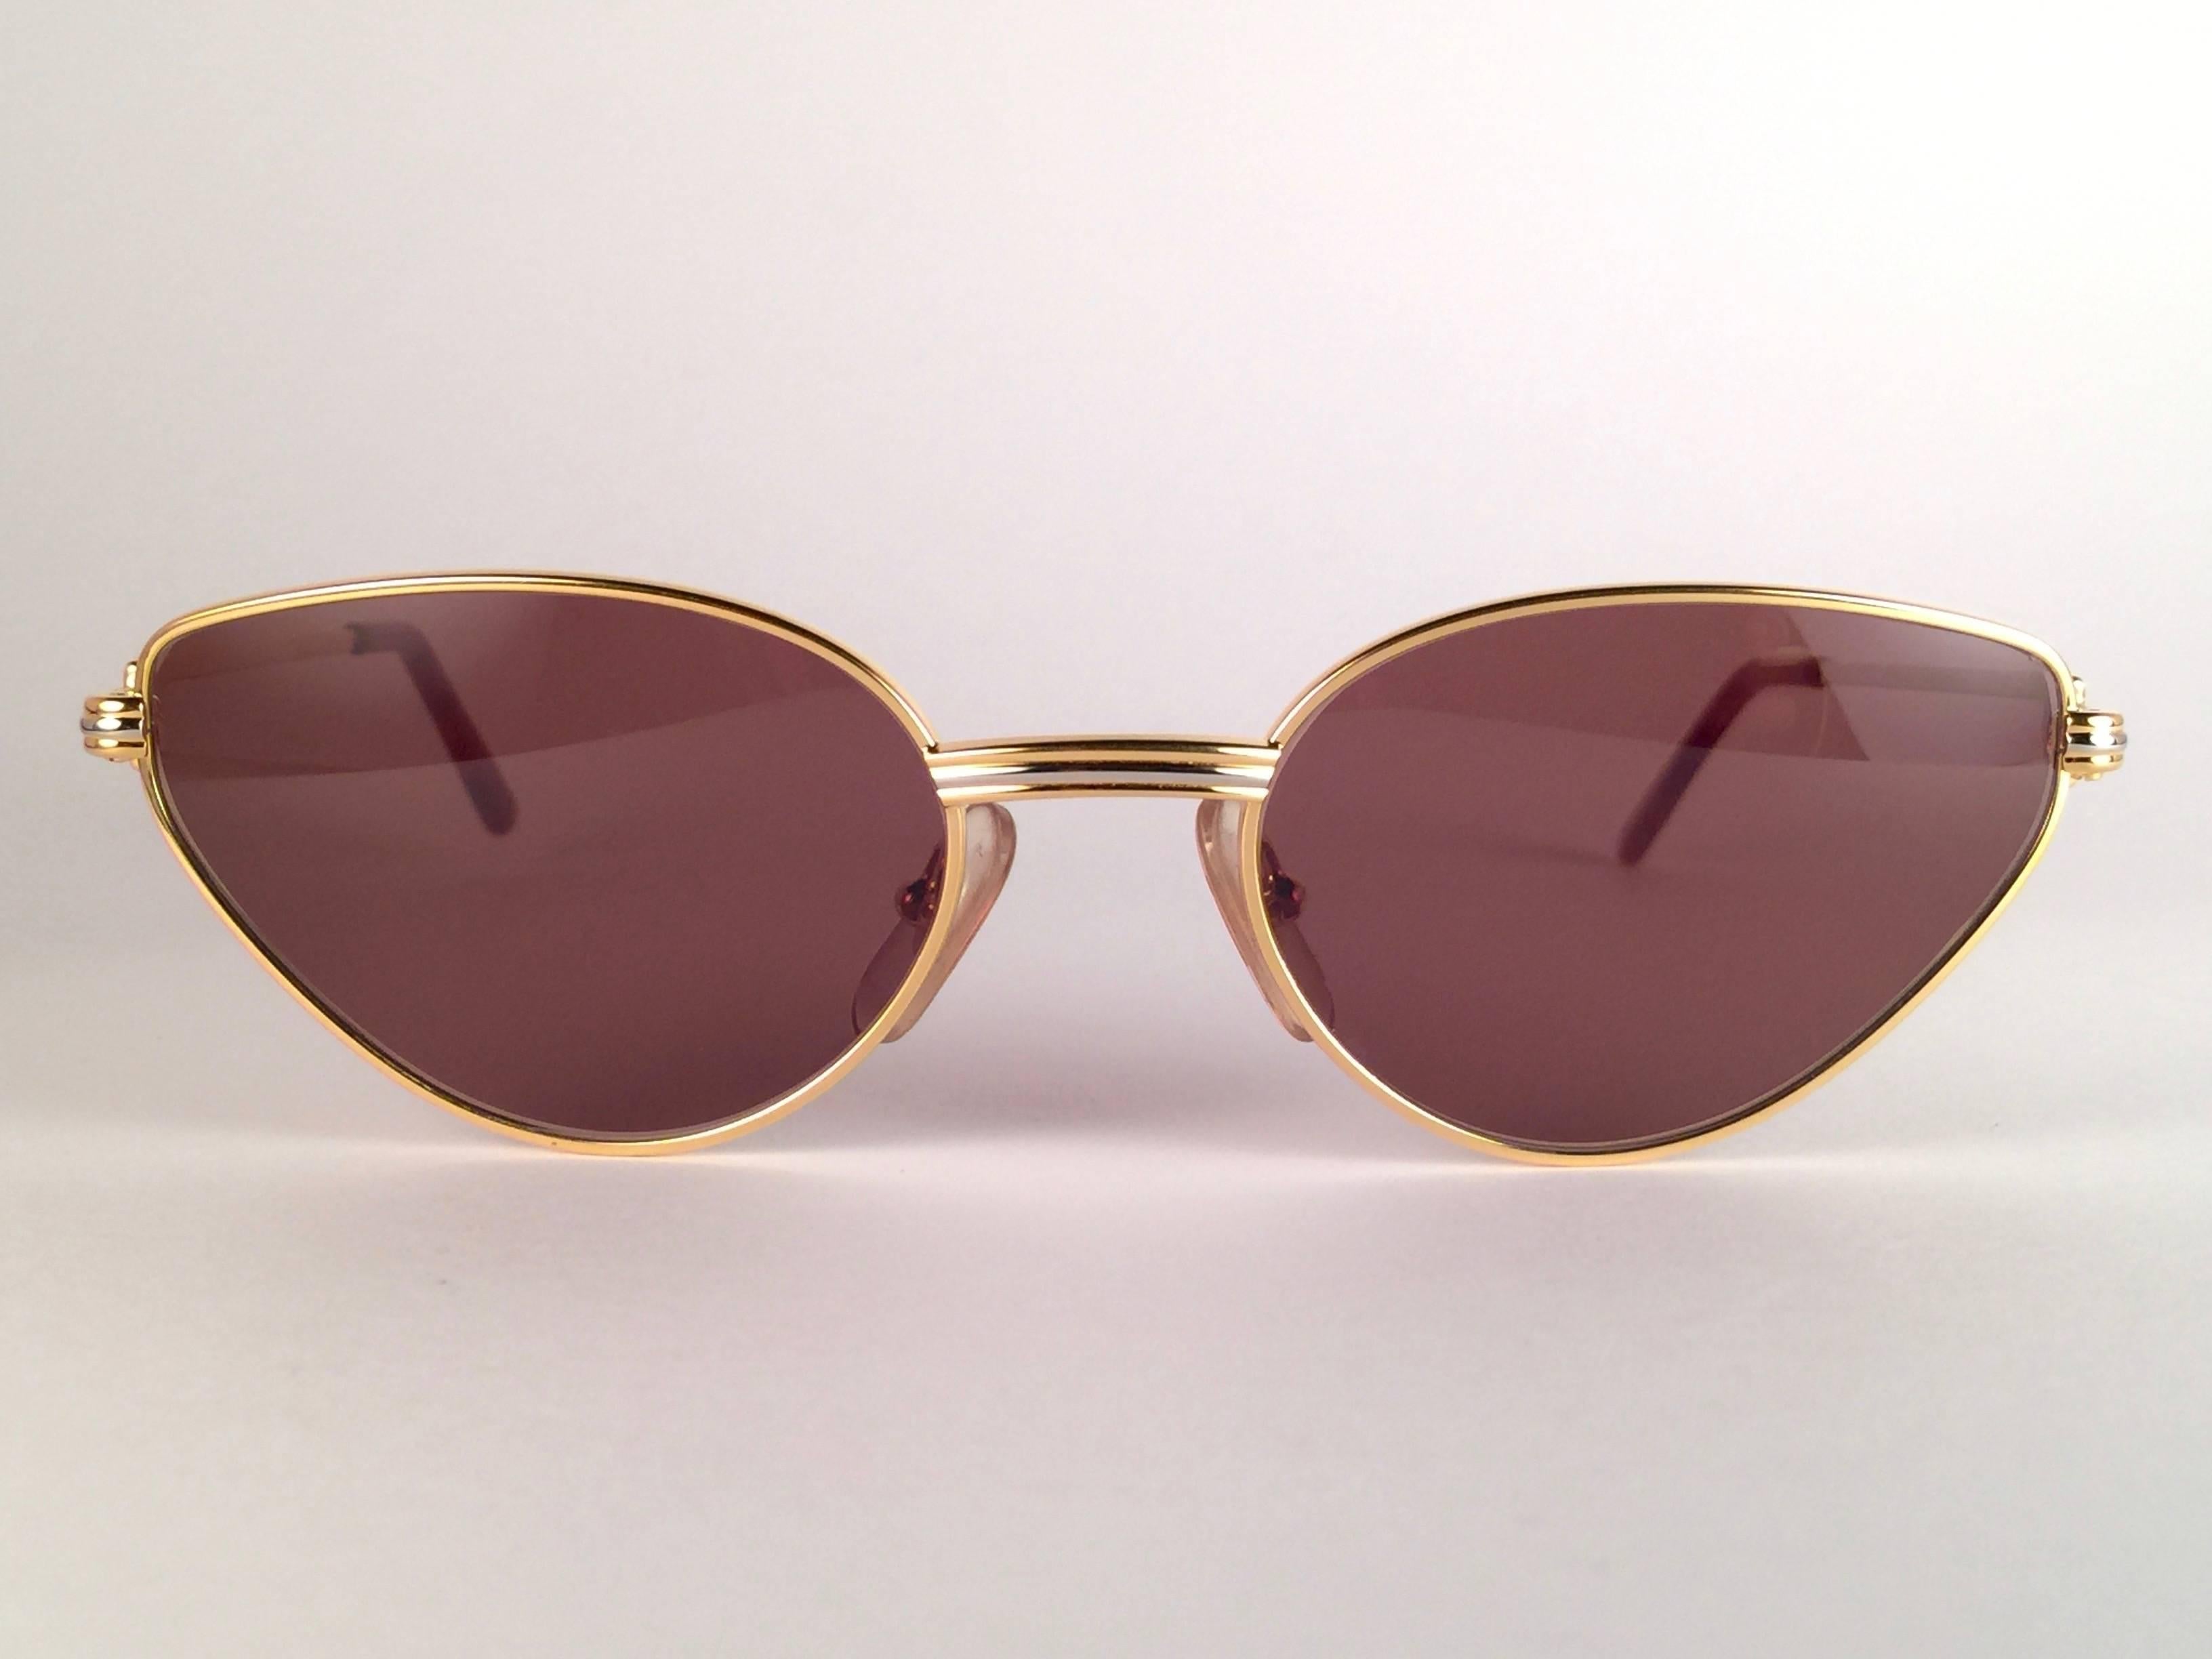 New Cartier Rivoli Vendome 56mm Cat Eye Sunglasses 18k Heavy Plated France In New Condition For Sale In Baleares, Baleares